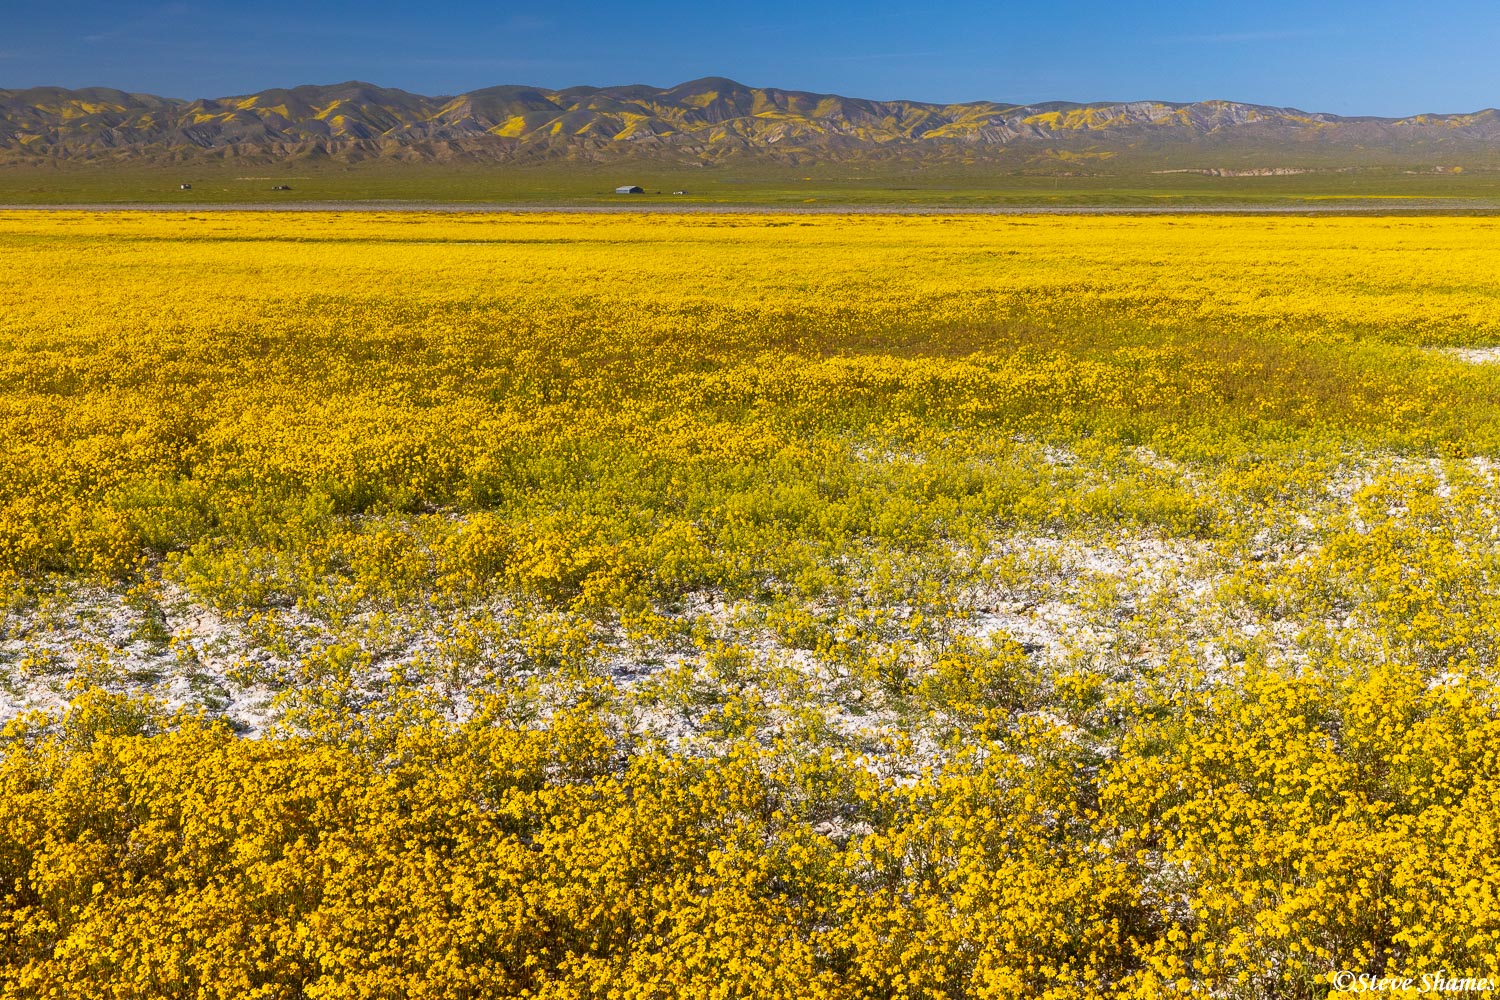 Carrizo Plain scene. That building in the distance gives some context to the scene.